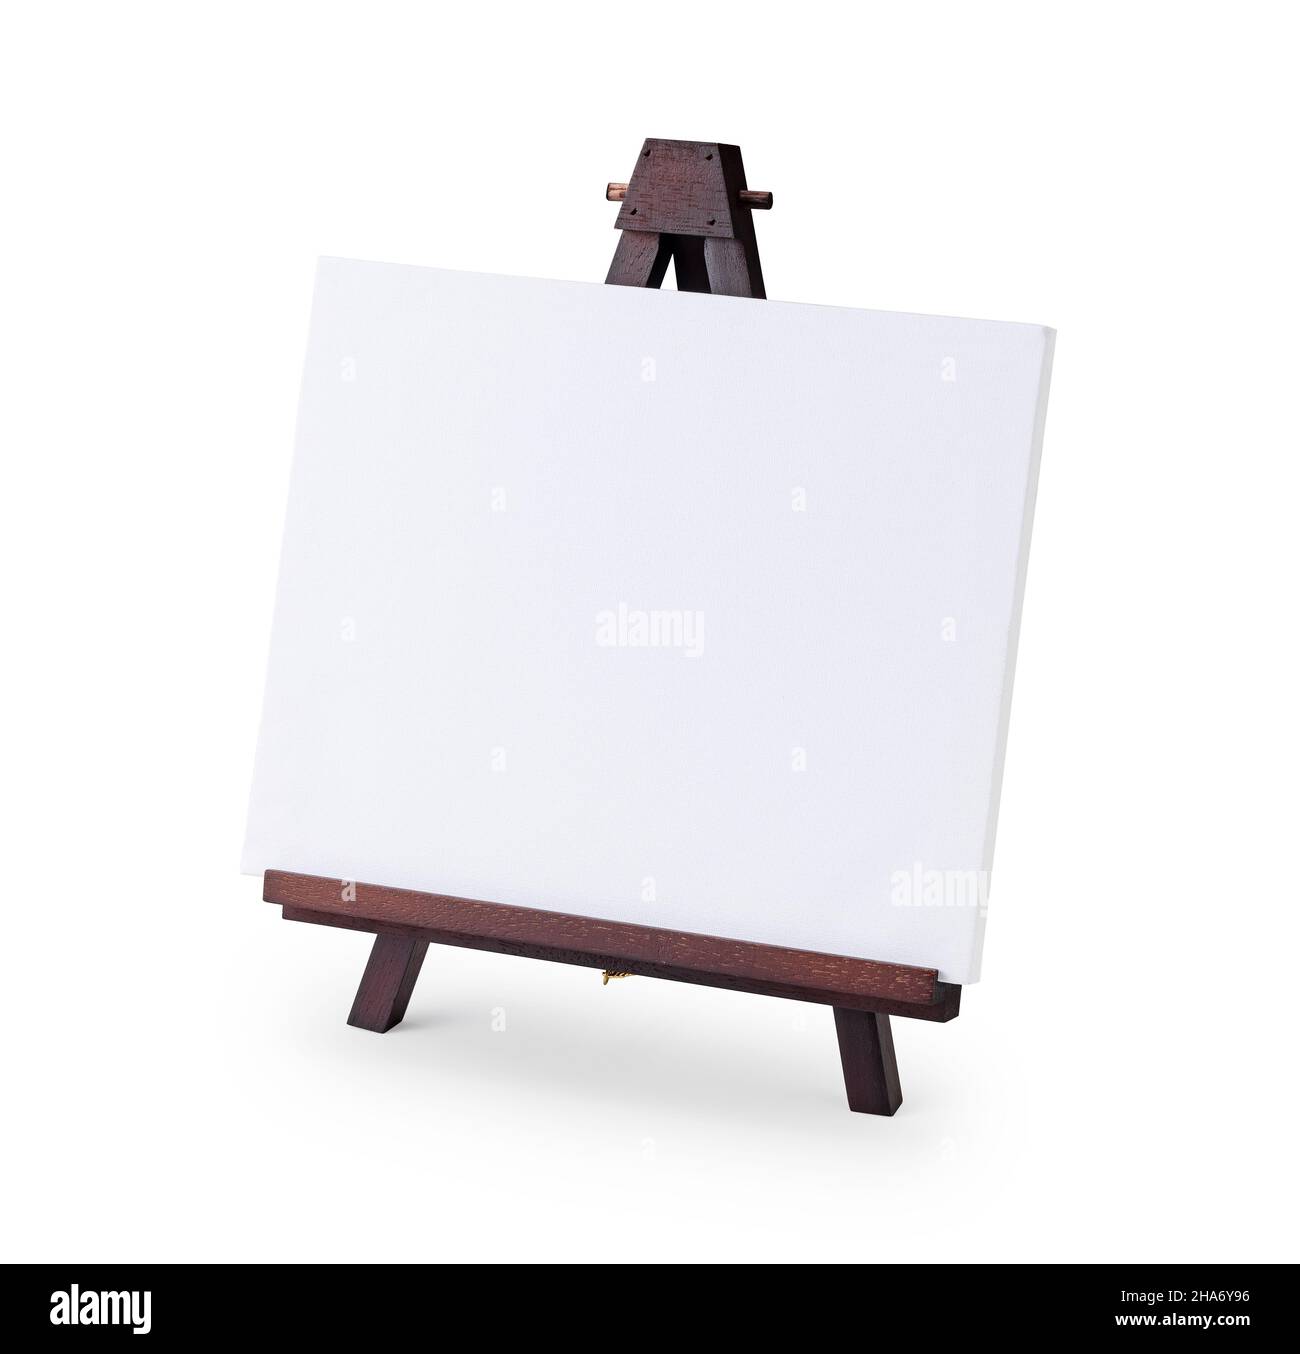 Small Easel On White Background Stock Photo, Picture and Royalty Free  Image. Image 83010990.